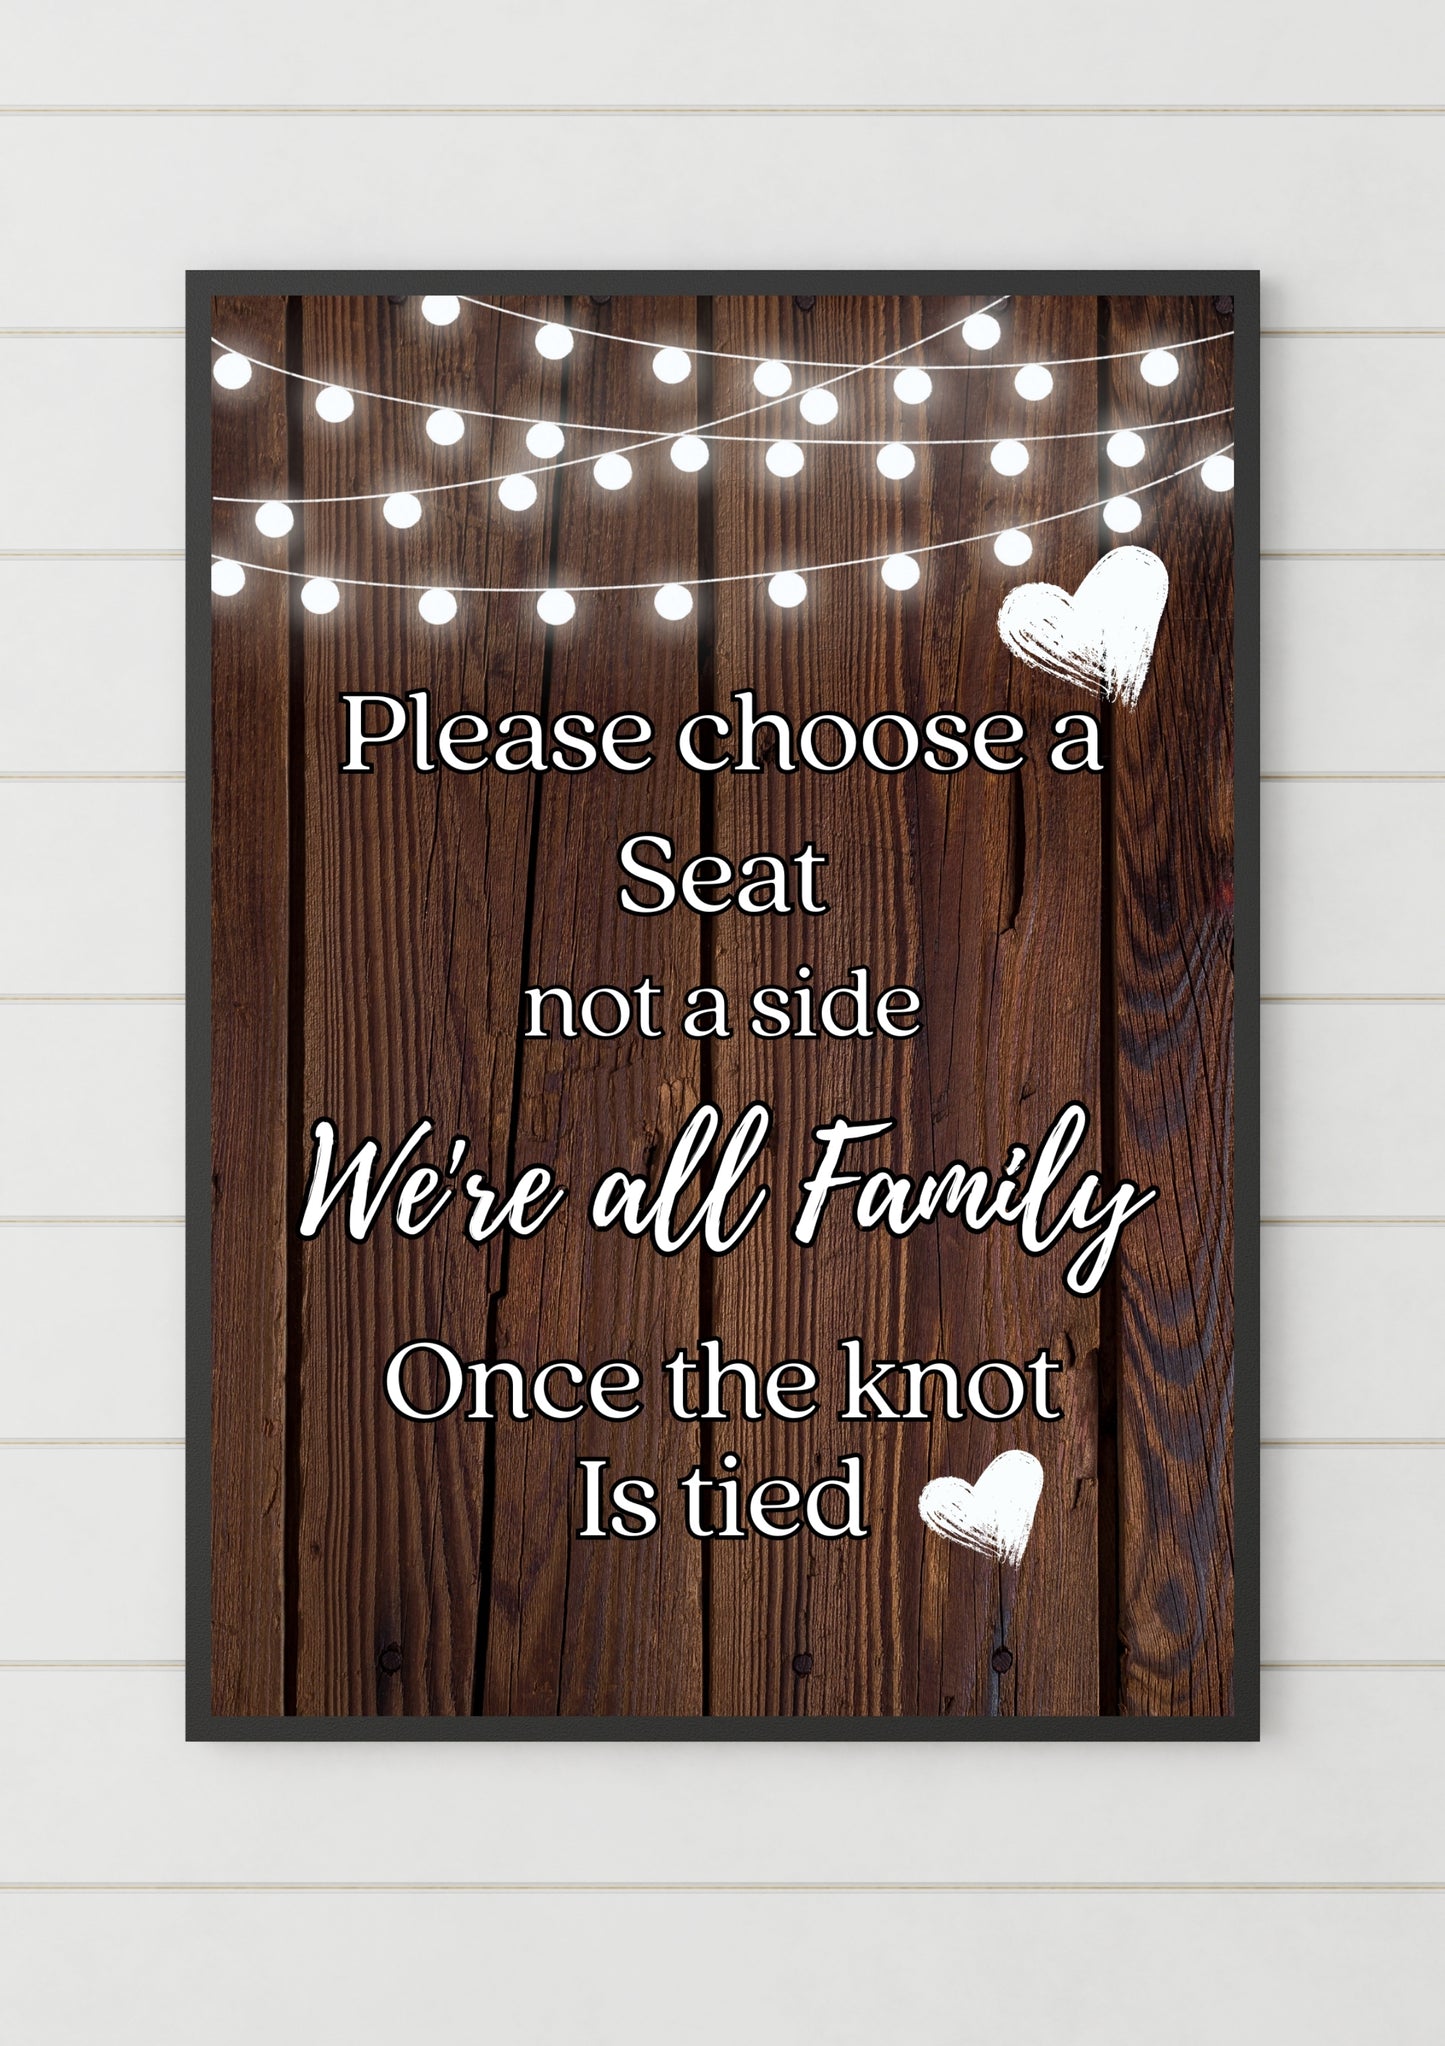 Rustic themed wedding sign